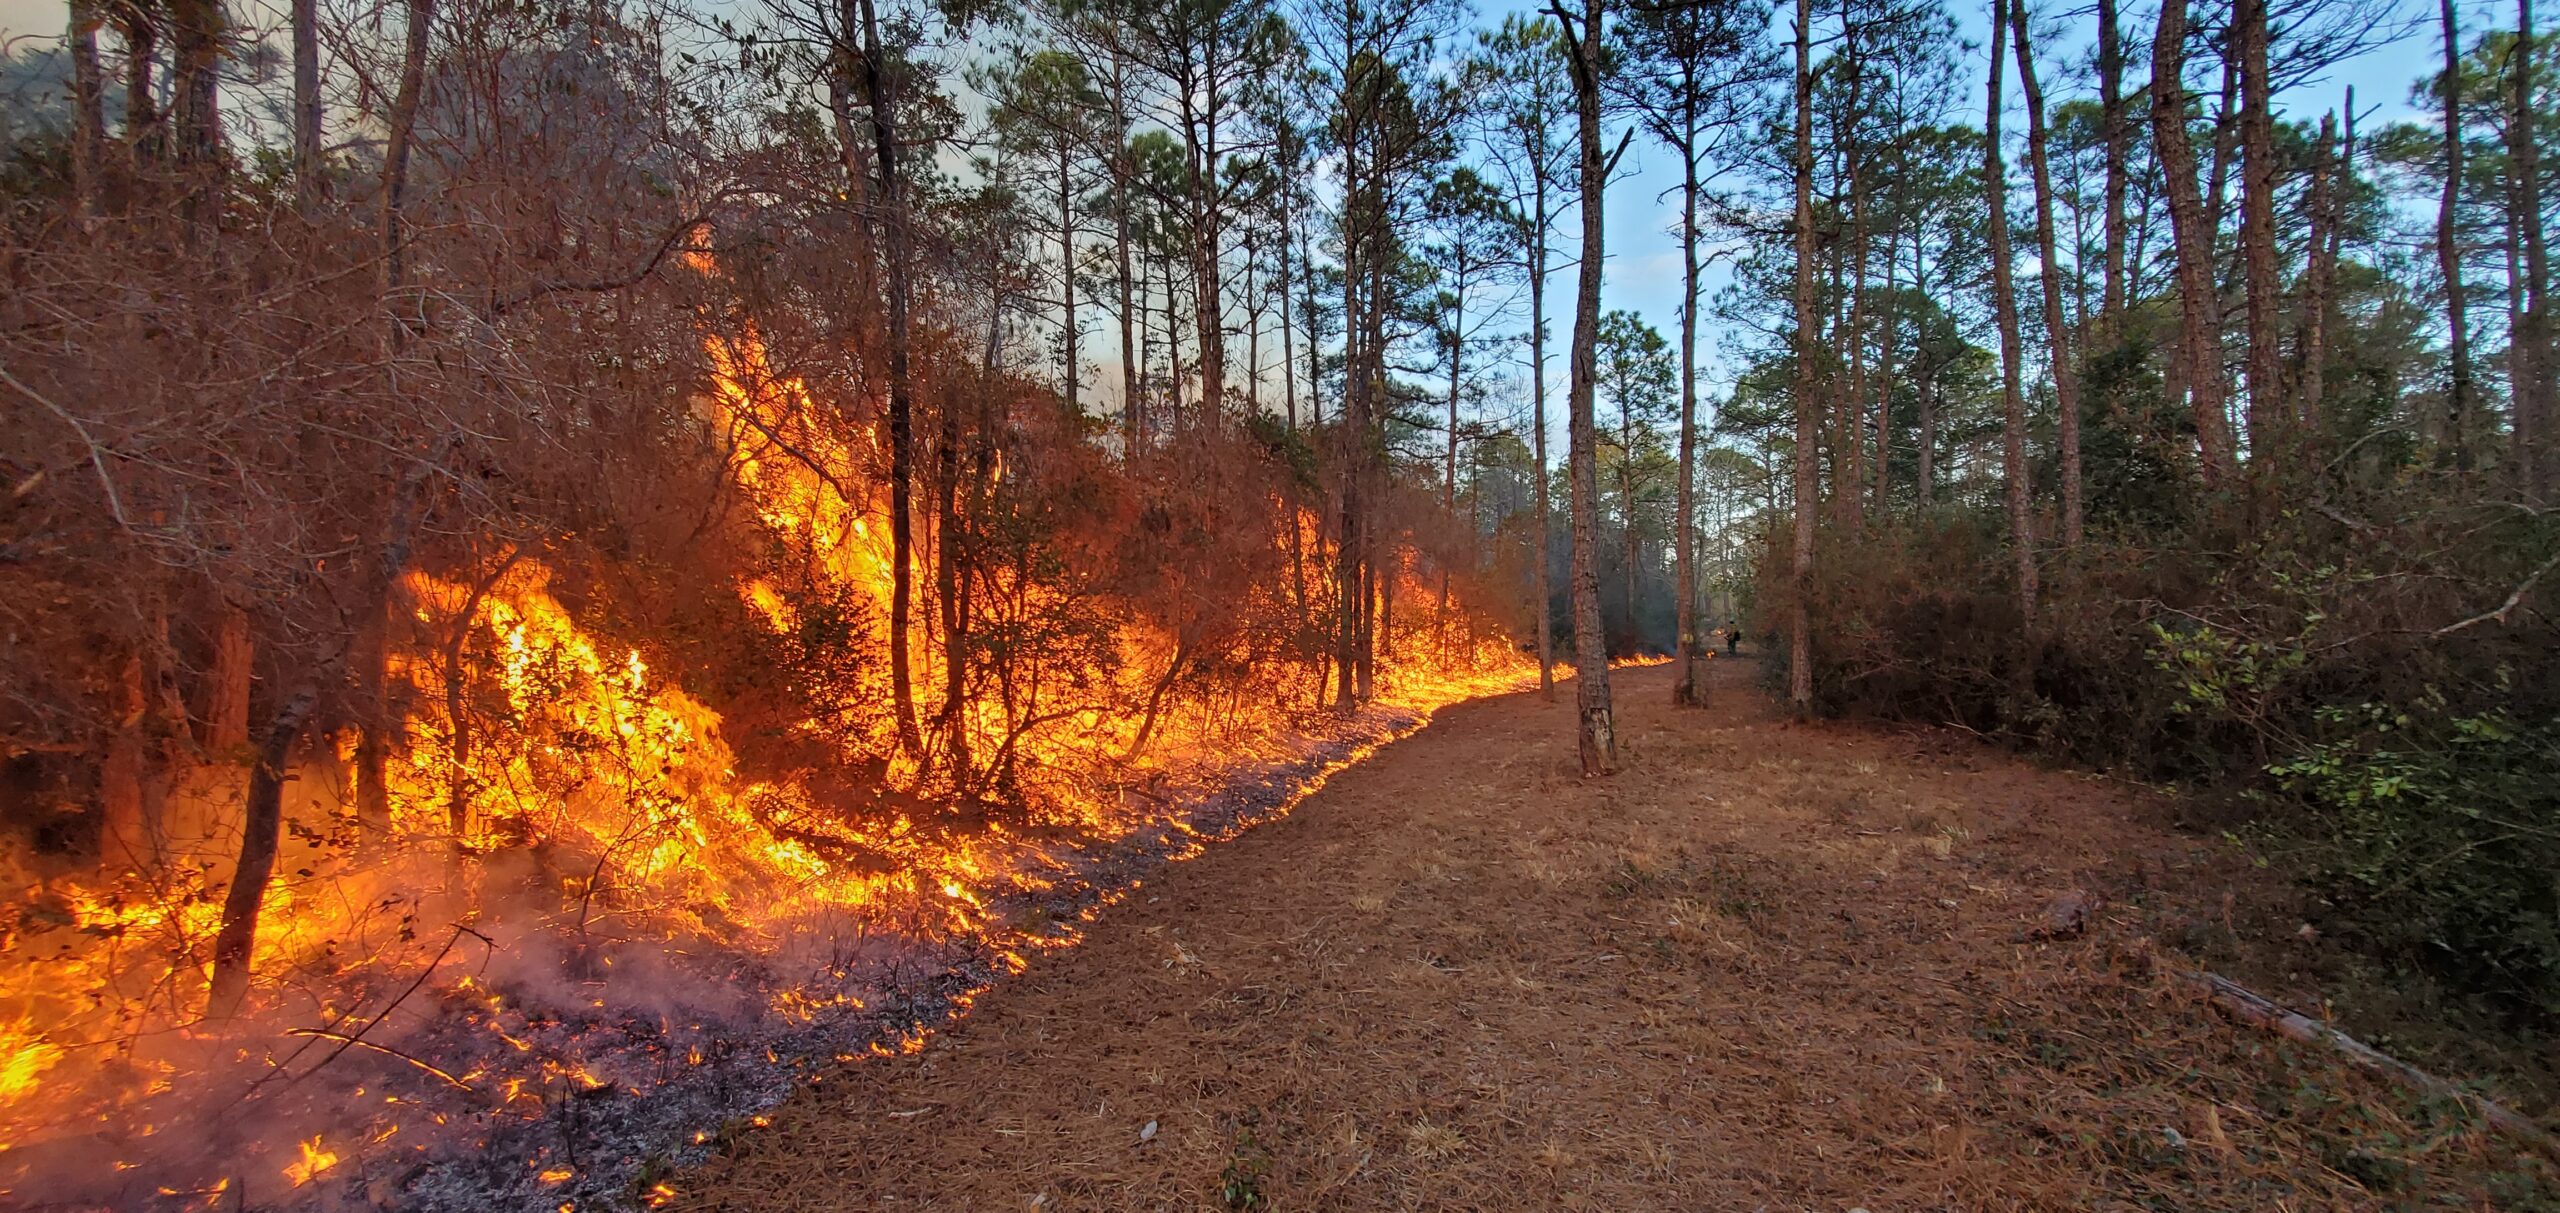 A fire burns on one side of the fire line and the other side remains unburned.